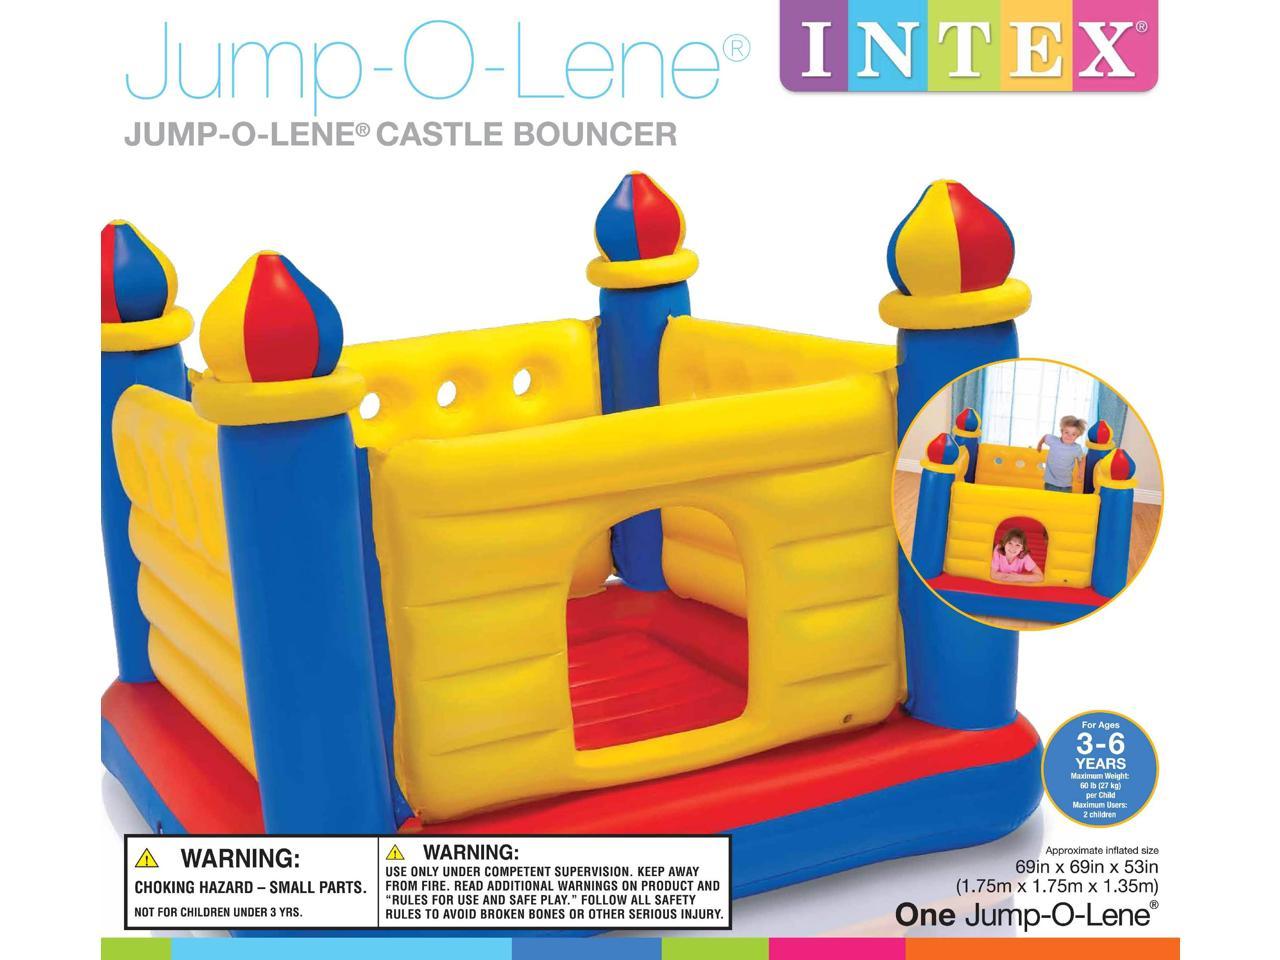 2 Pack Intex Inflatable 80-Inch Jump-O-Lene Ring Bouncer For Kids Ages 3-6 